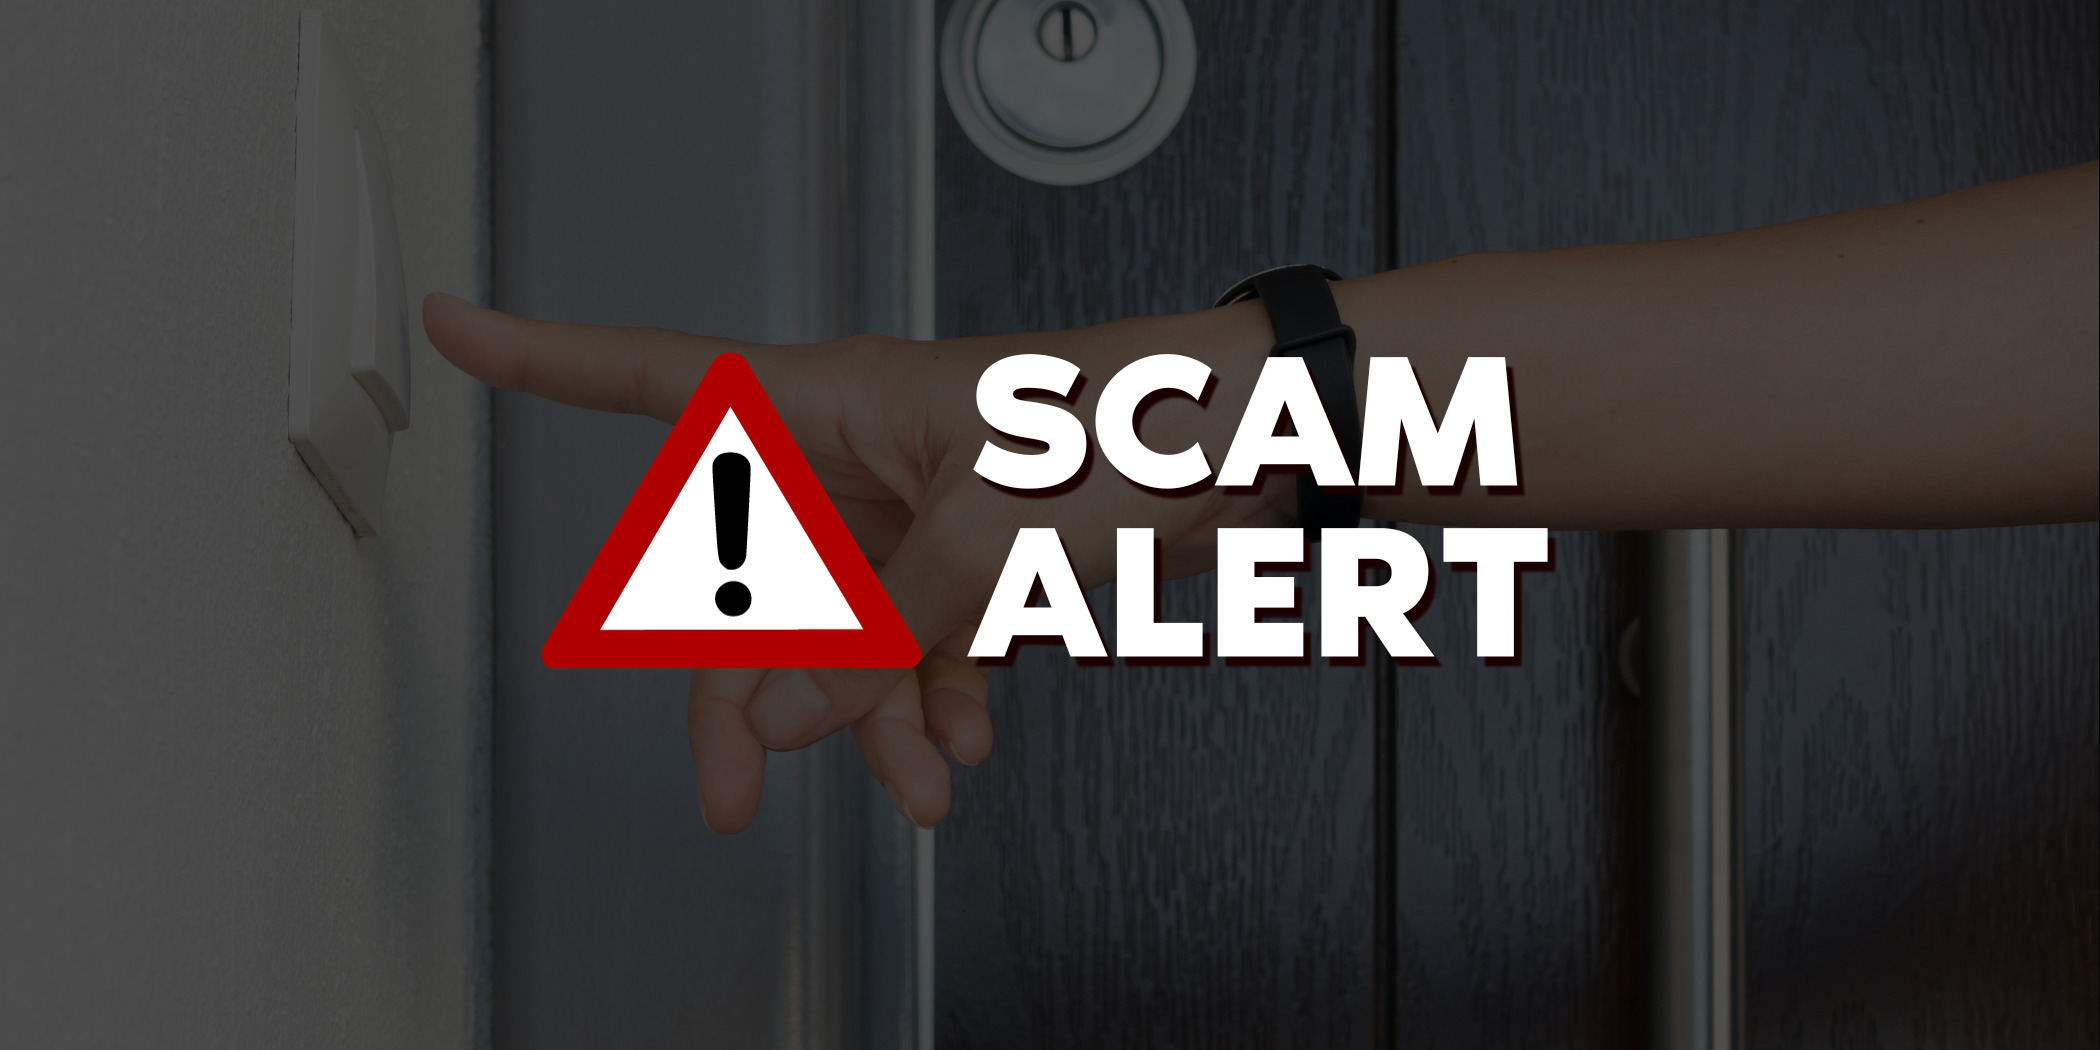 Graphic with image of a hand ringing a doorbell with "Scam Alert"